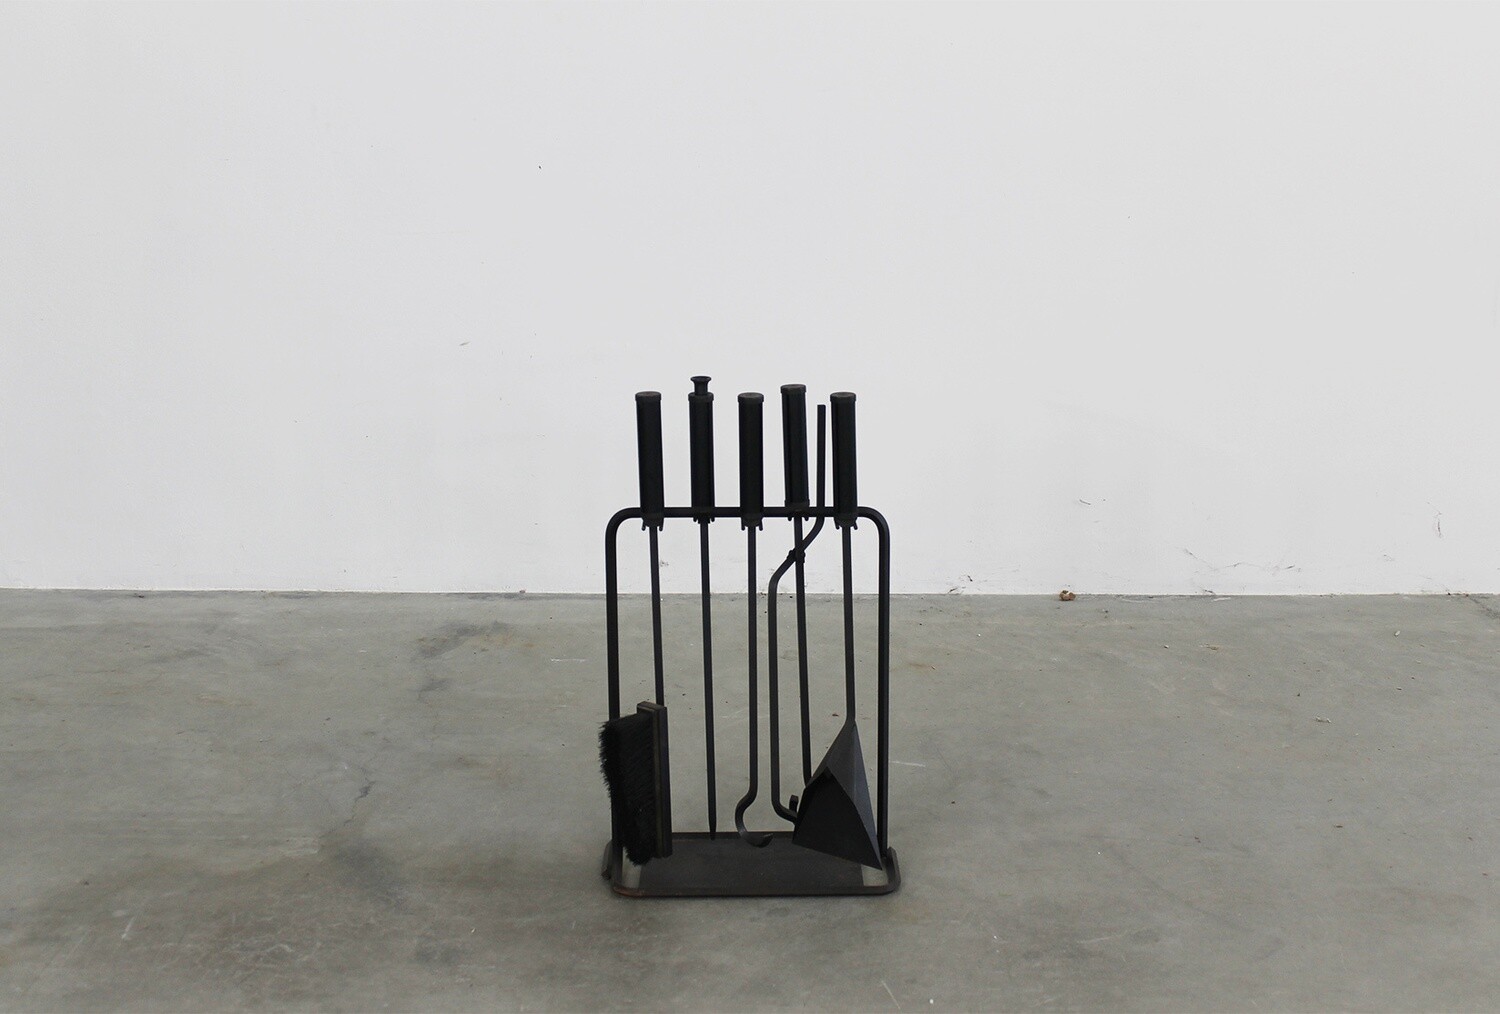 Tobia & Afra Scarpa Fireplace Tools in Iron and Wood by Dimensione Fuoco 1980s